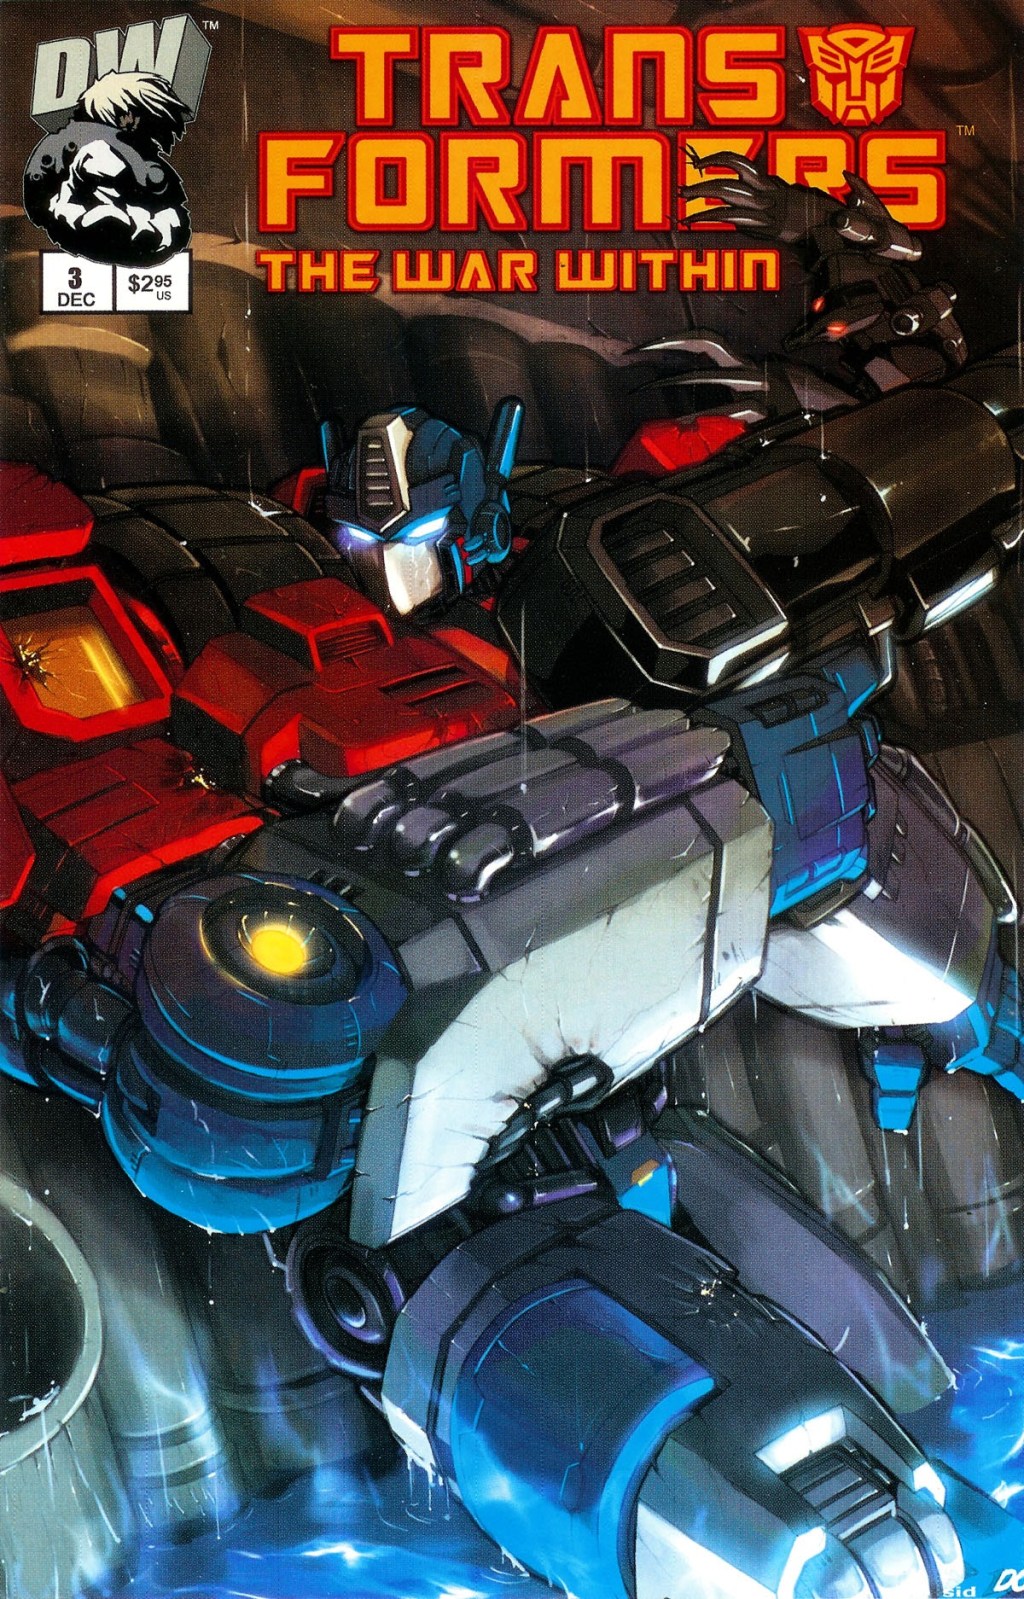 Transformers: The War Within Vol. 1 Issue #3 (2002), Dreamwave Productions. Words by Simon Furman. Art by Don Figueroa, Elaine To, and Rob Ruffolo.